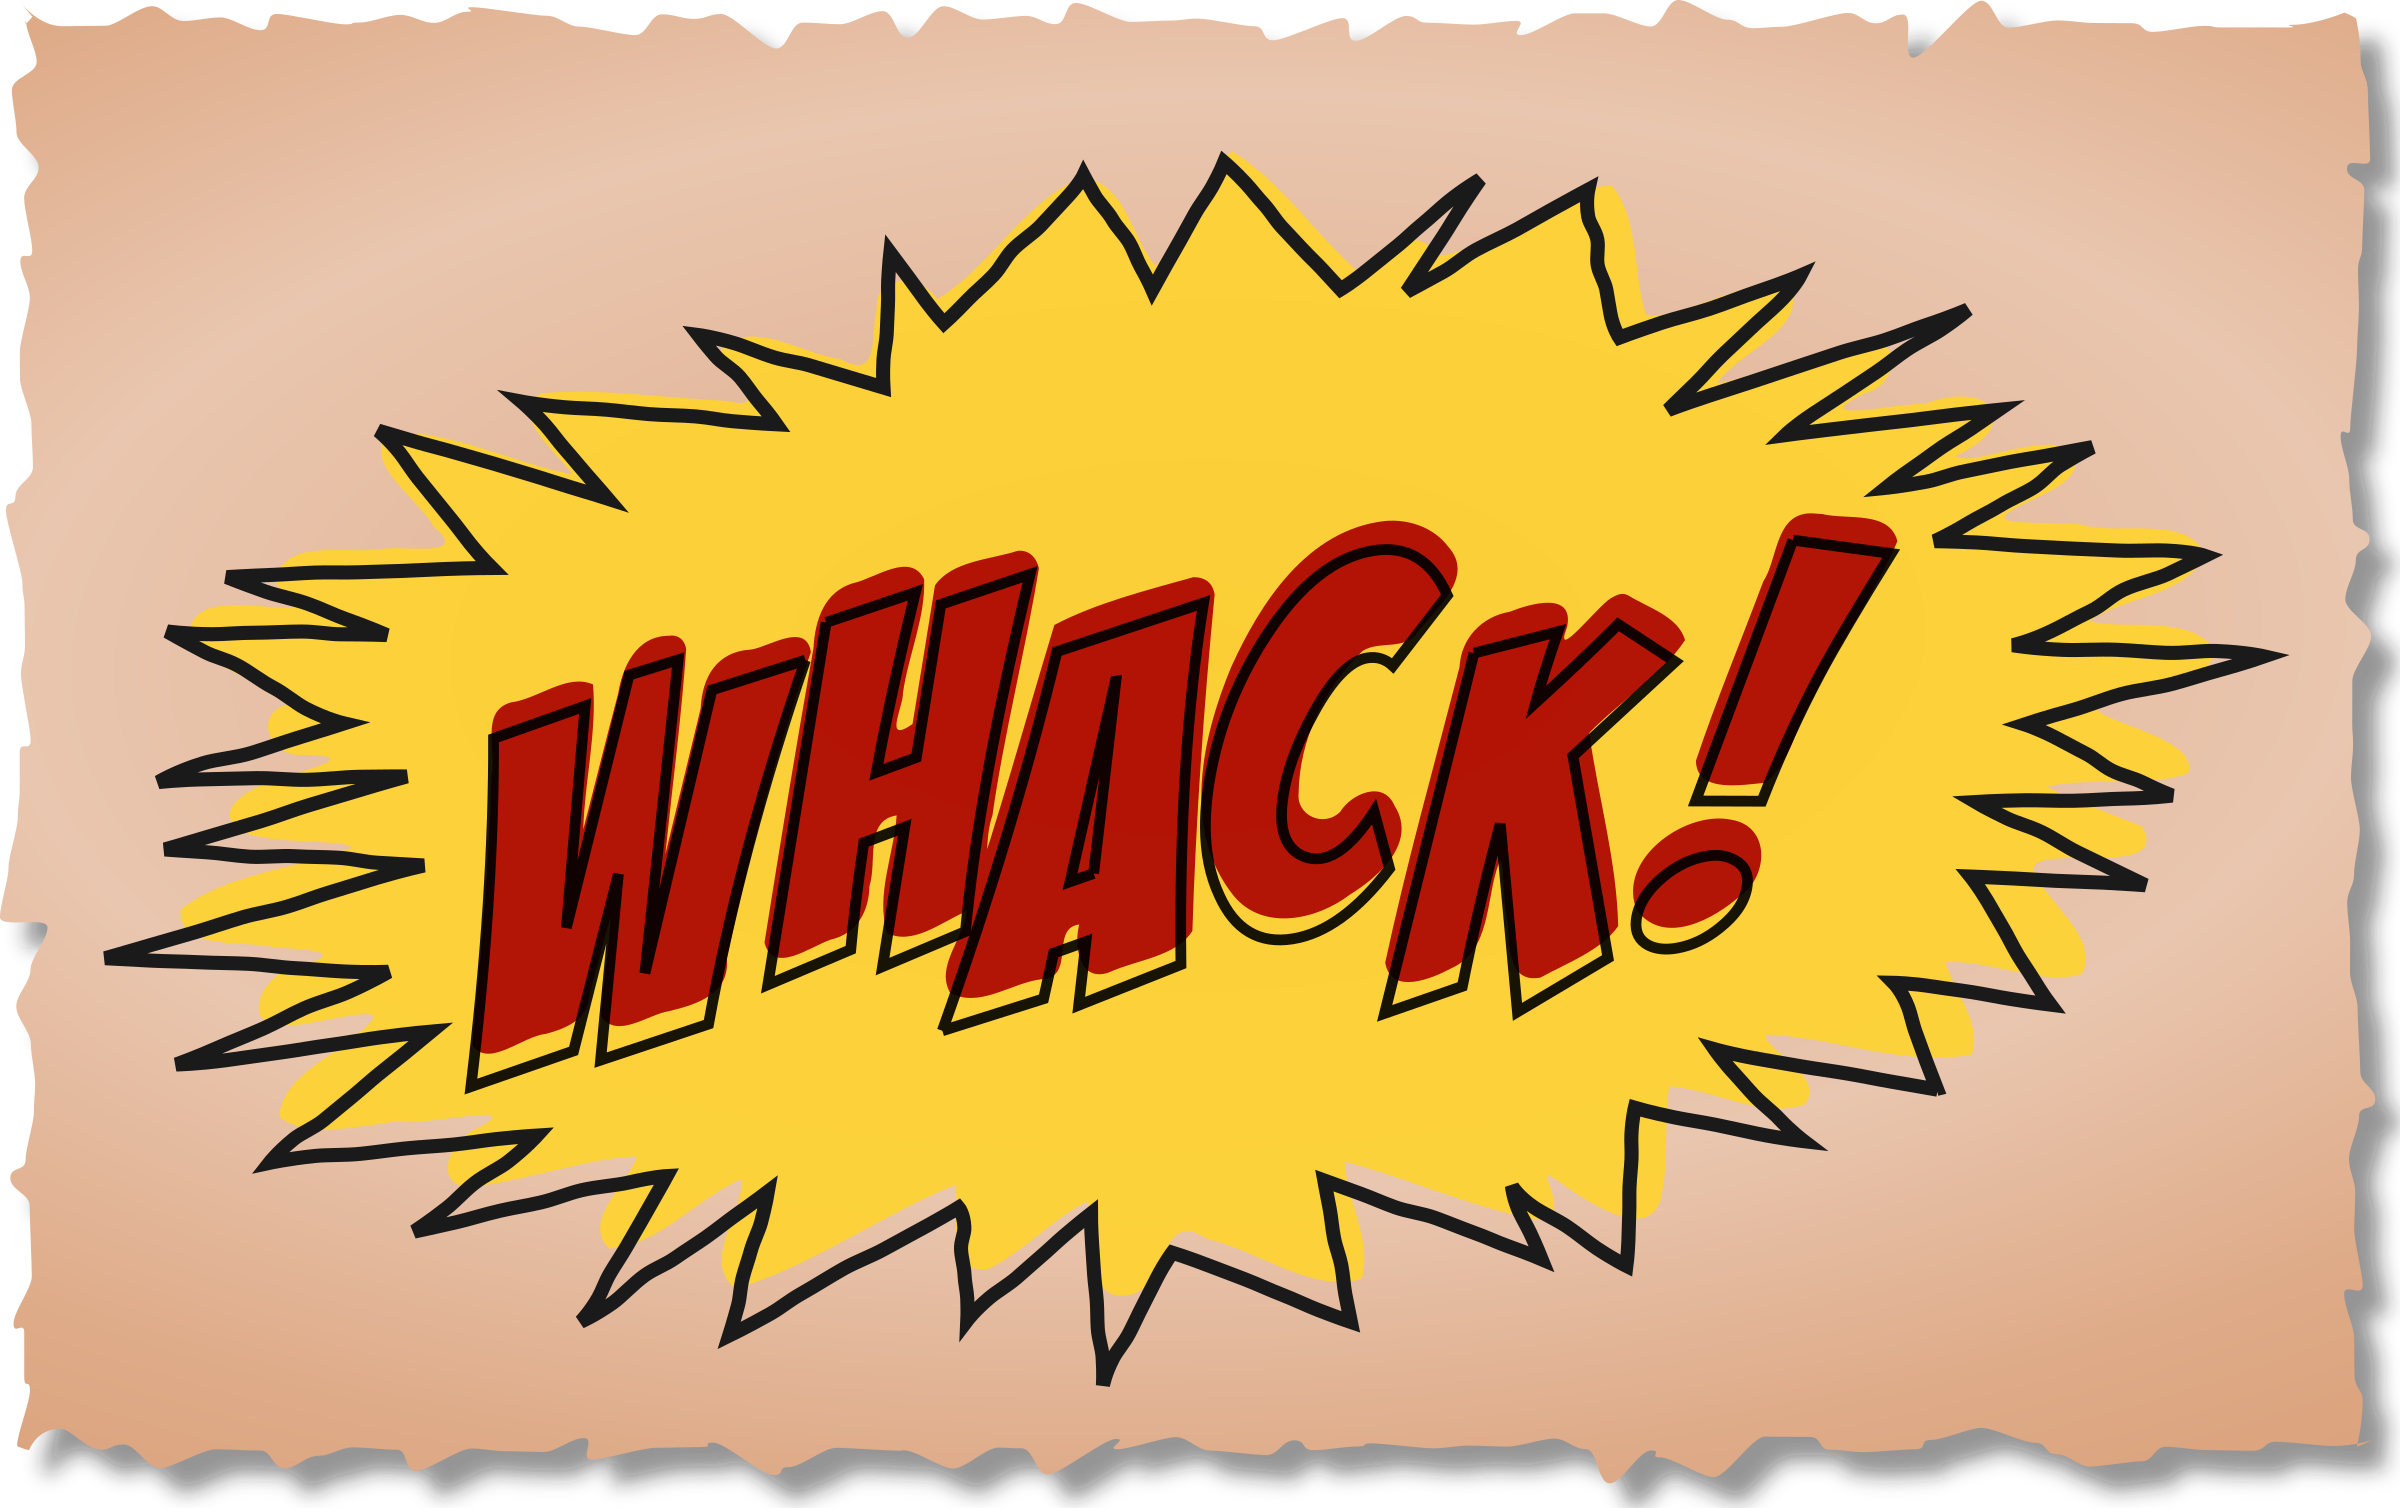 Whack comic book sound effect PNG icon